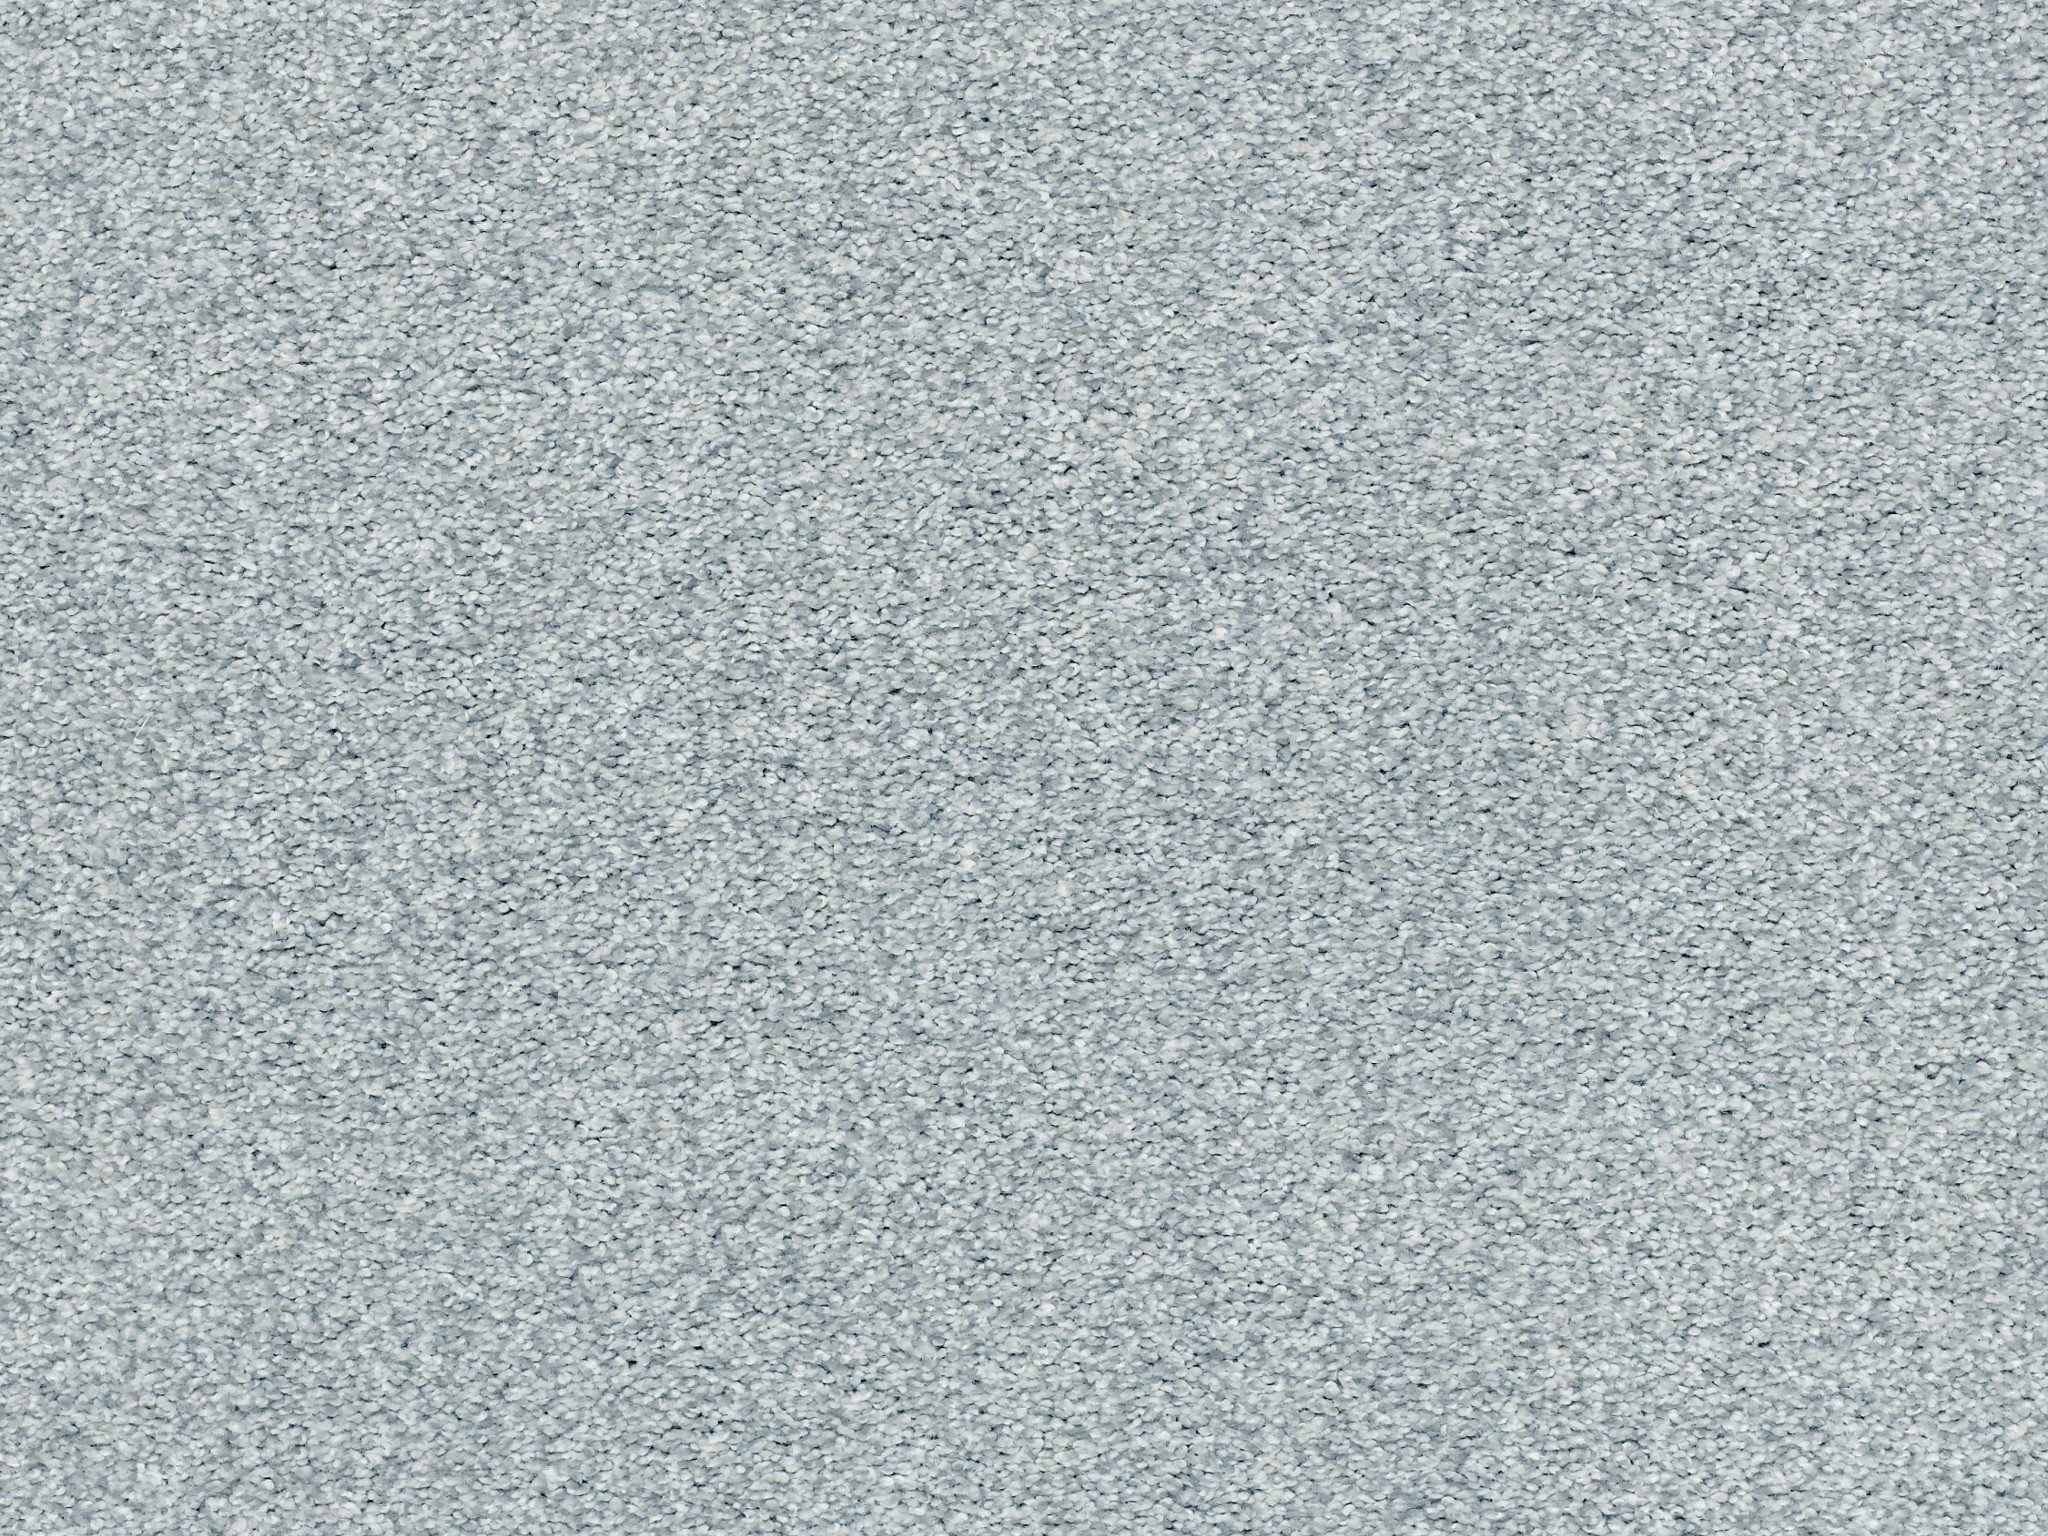 Distinguished Variety Carpet - Steel(T) Zoomed Swatch Image